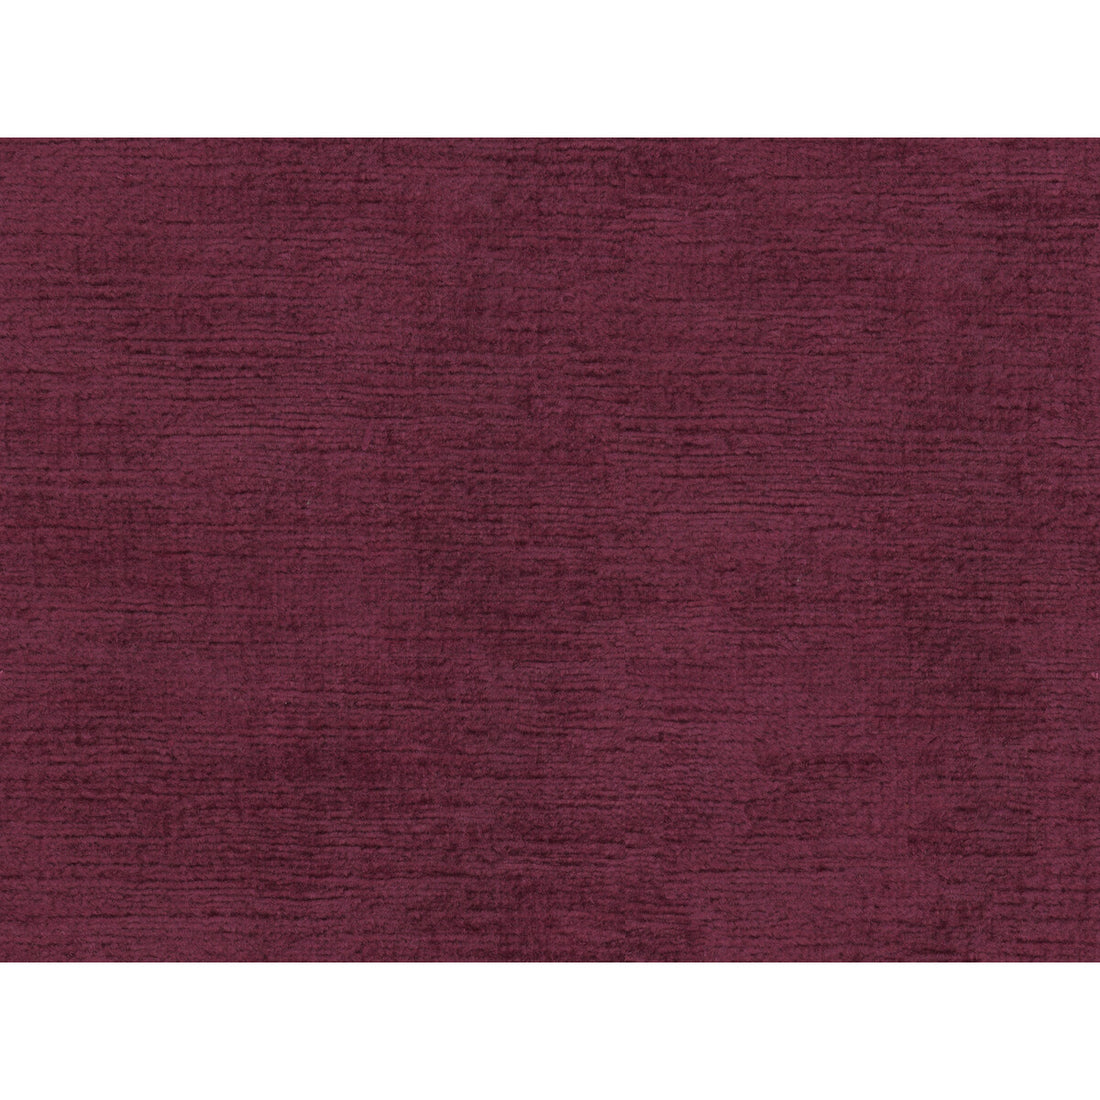 Fulham Linen V fabric in mulberry color - pattern 2016133.79.0 - by Lee Jofa